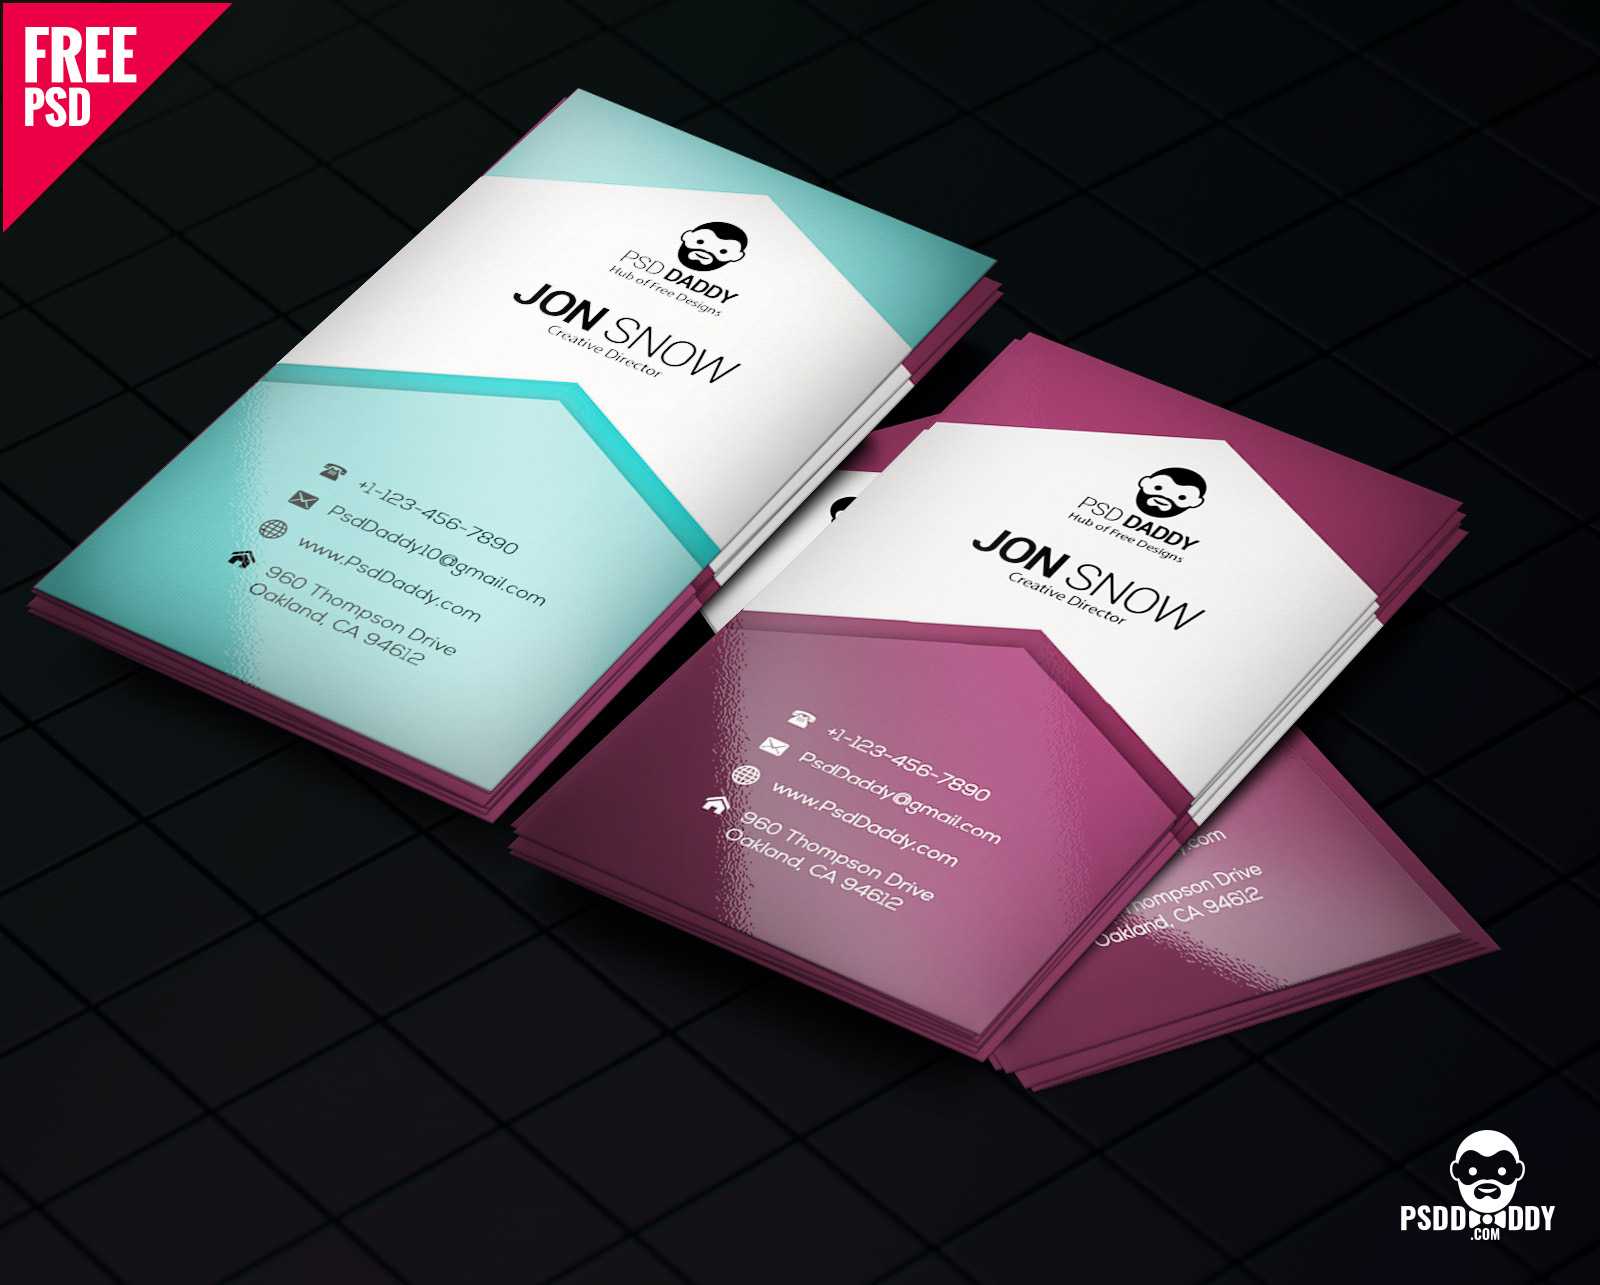 Download]Creative Business Card Psd Free | Psddaddy Within Name Card Template Photoshop